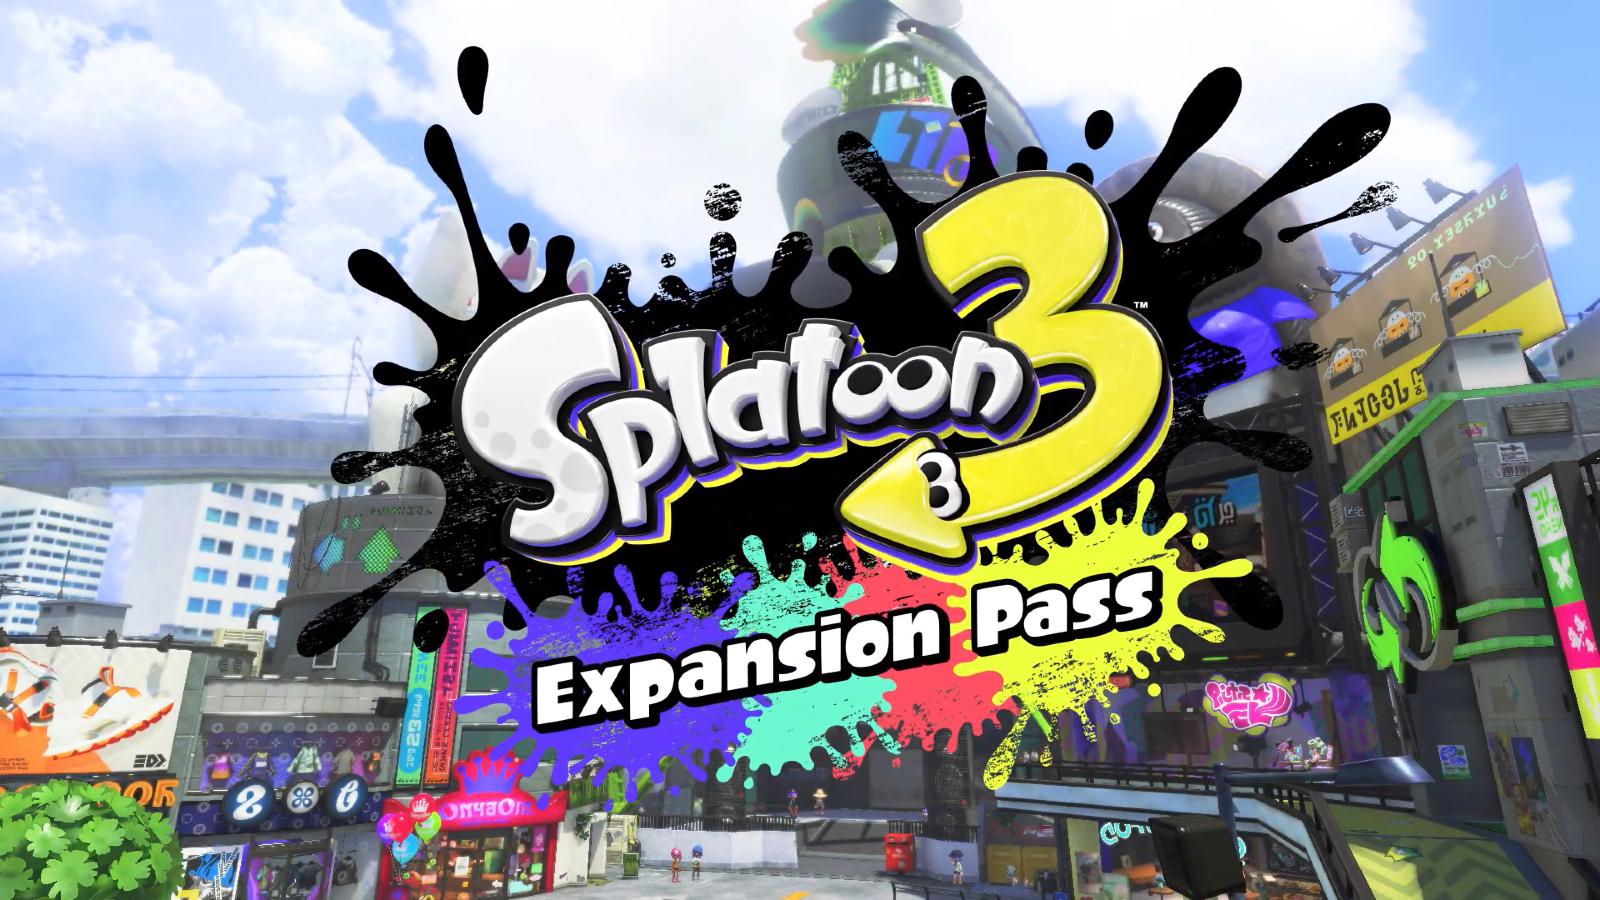 Splatoon 3's Expansion Pass offers players two new places to adventure.